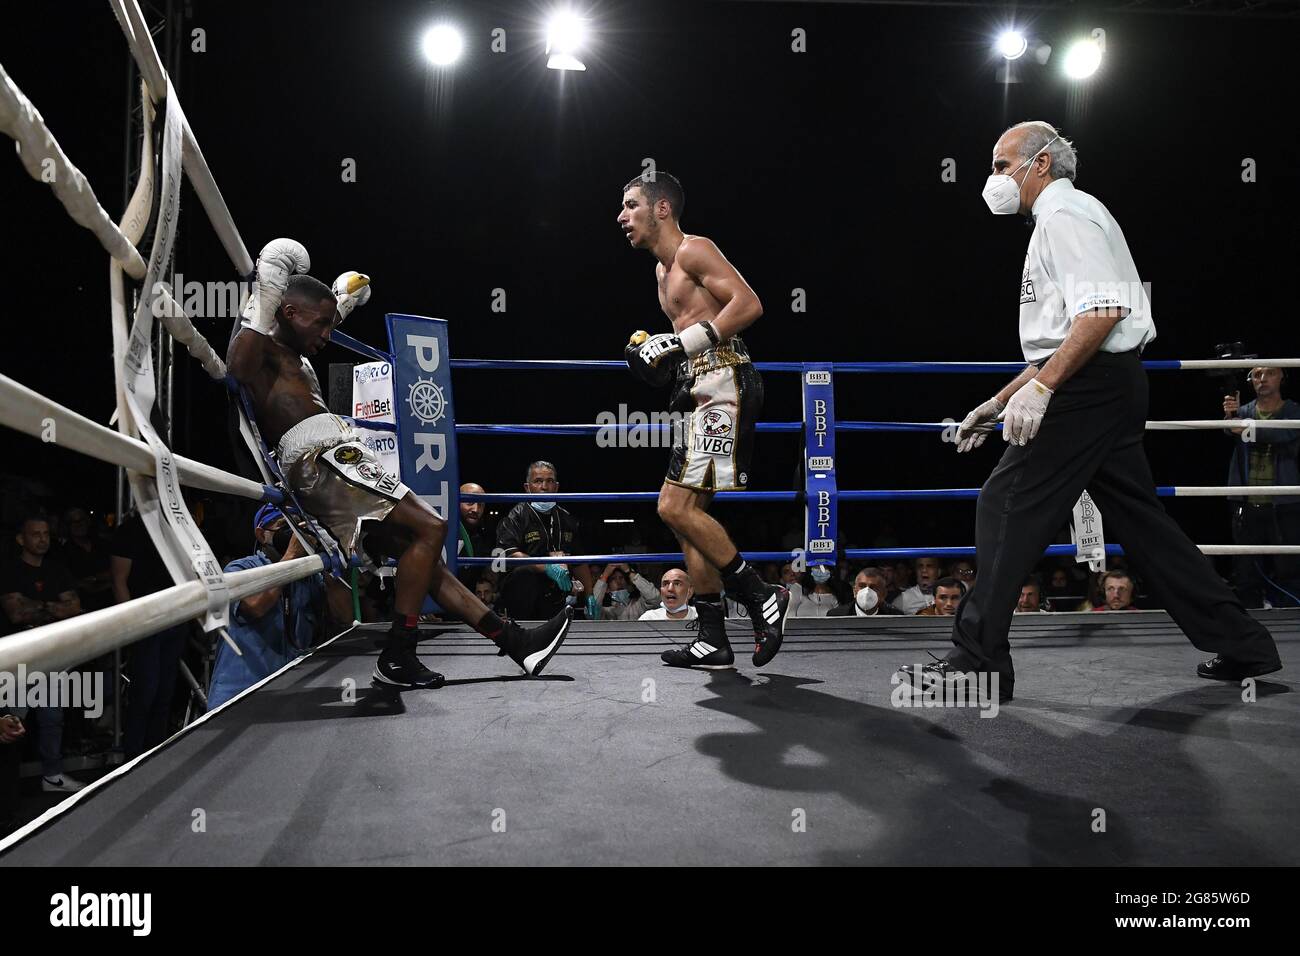 Ladispoli, Italy. 16th July, 2021. Christopher Mondongo (Italy) vs Marvin Callea (France) during the WBC Mediterranean Super Bantamweight Title Fights of Italy on July 16, 2021 at Stadio Angelo Sale in Ladispoli, Italy/LiveMedia Credit: Independent Photo Agency/Alamy Live News Stock Photo